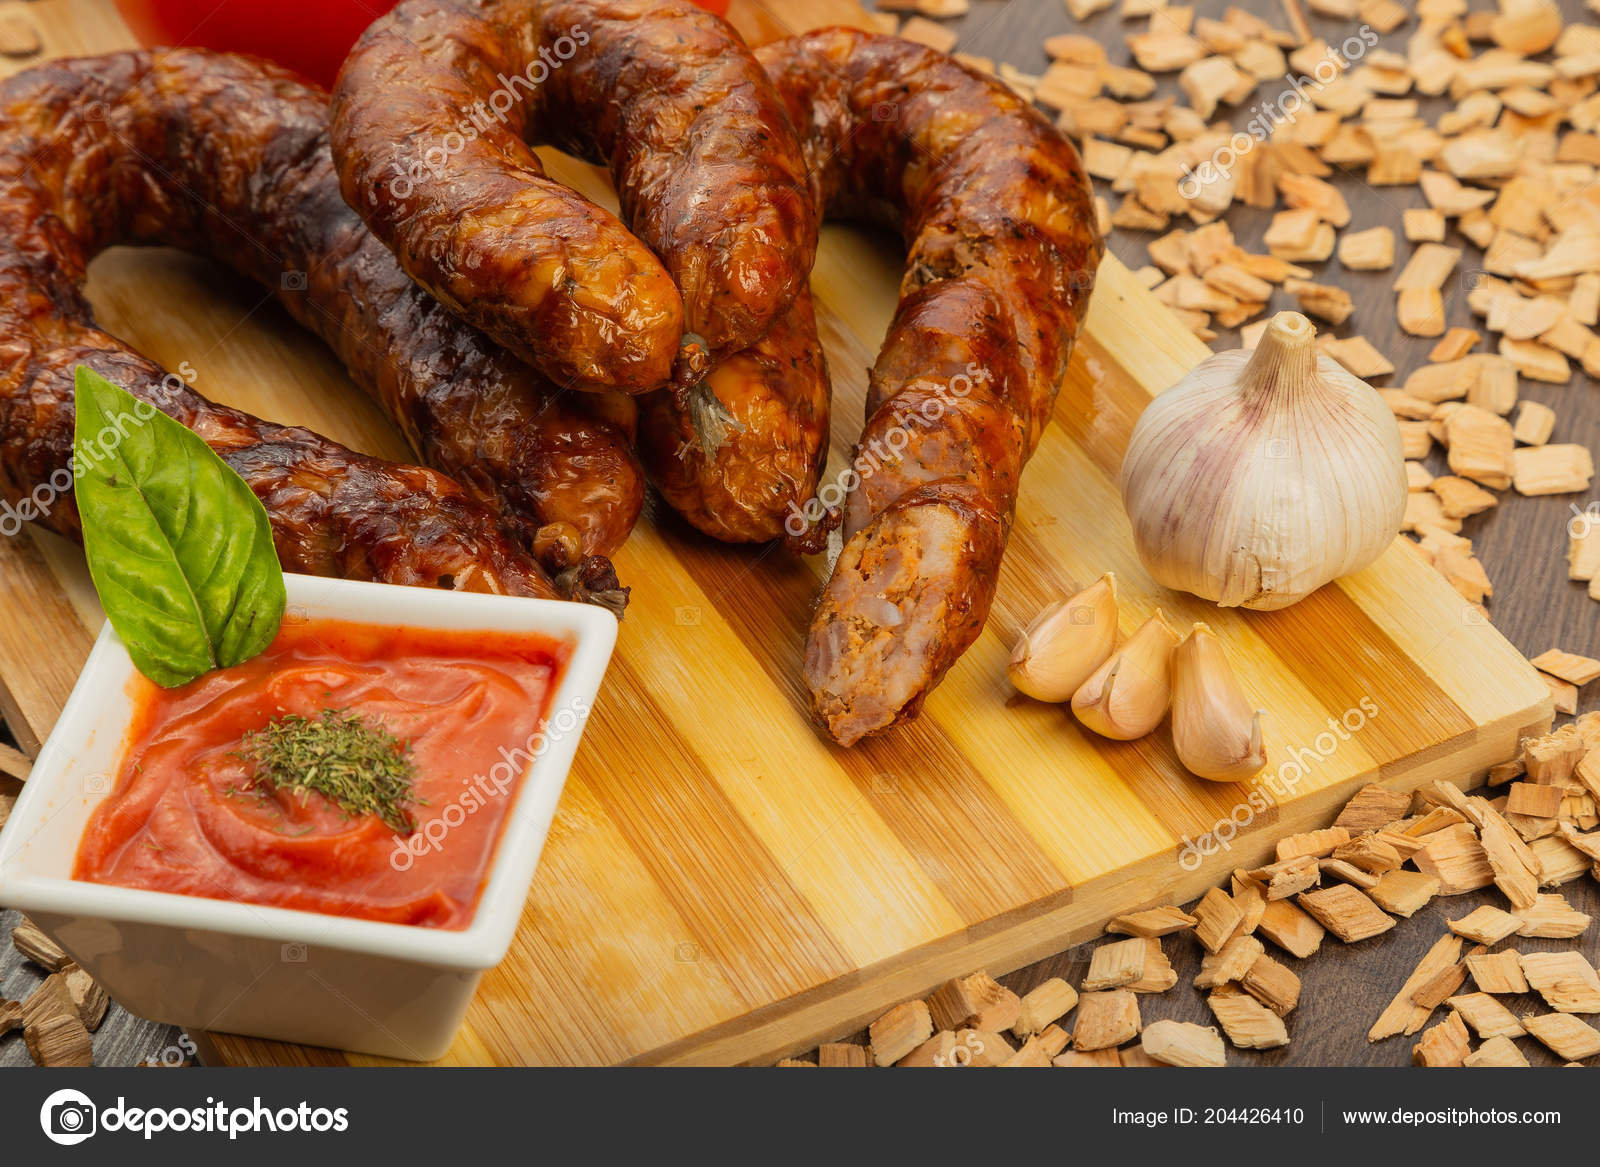 Homemade sausage on a wooden background